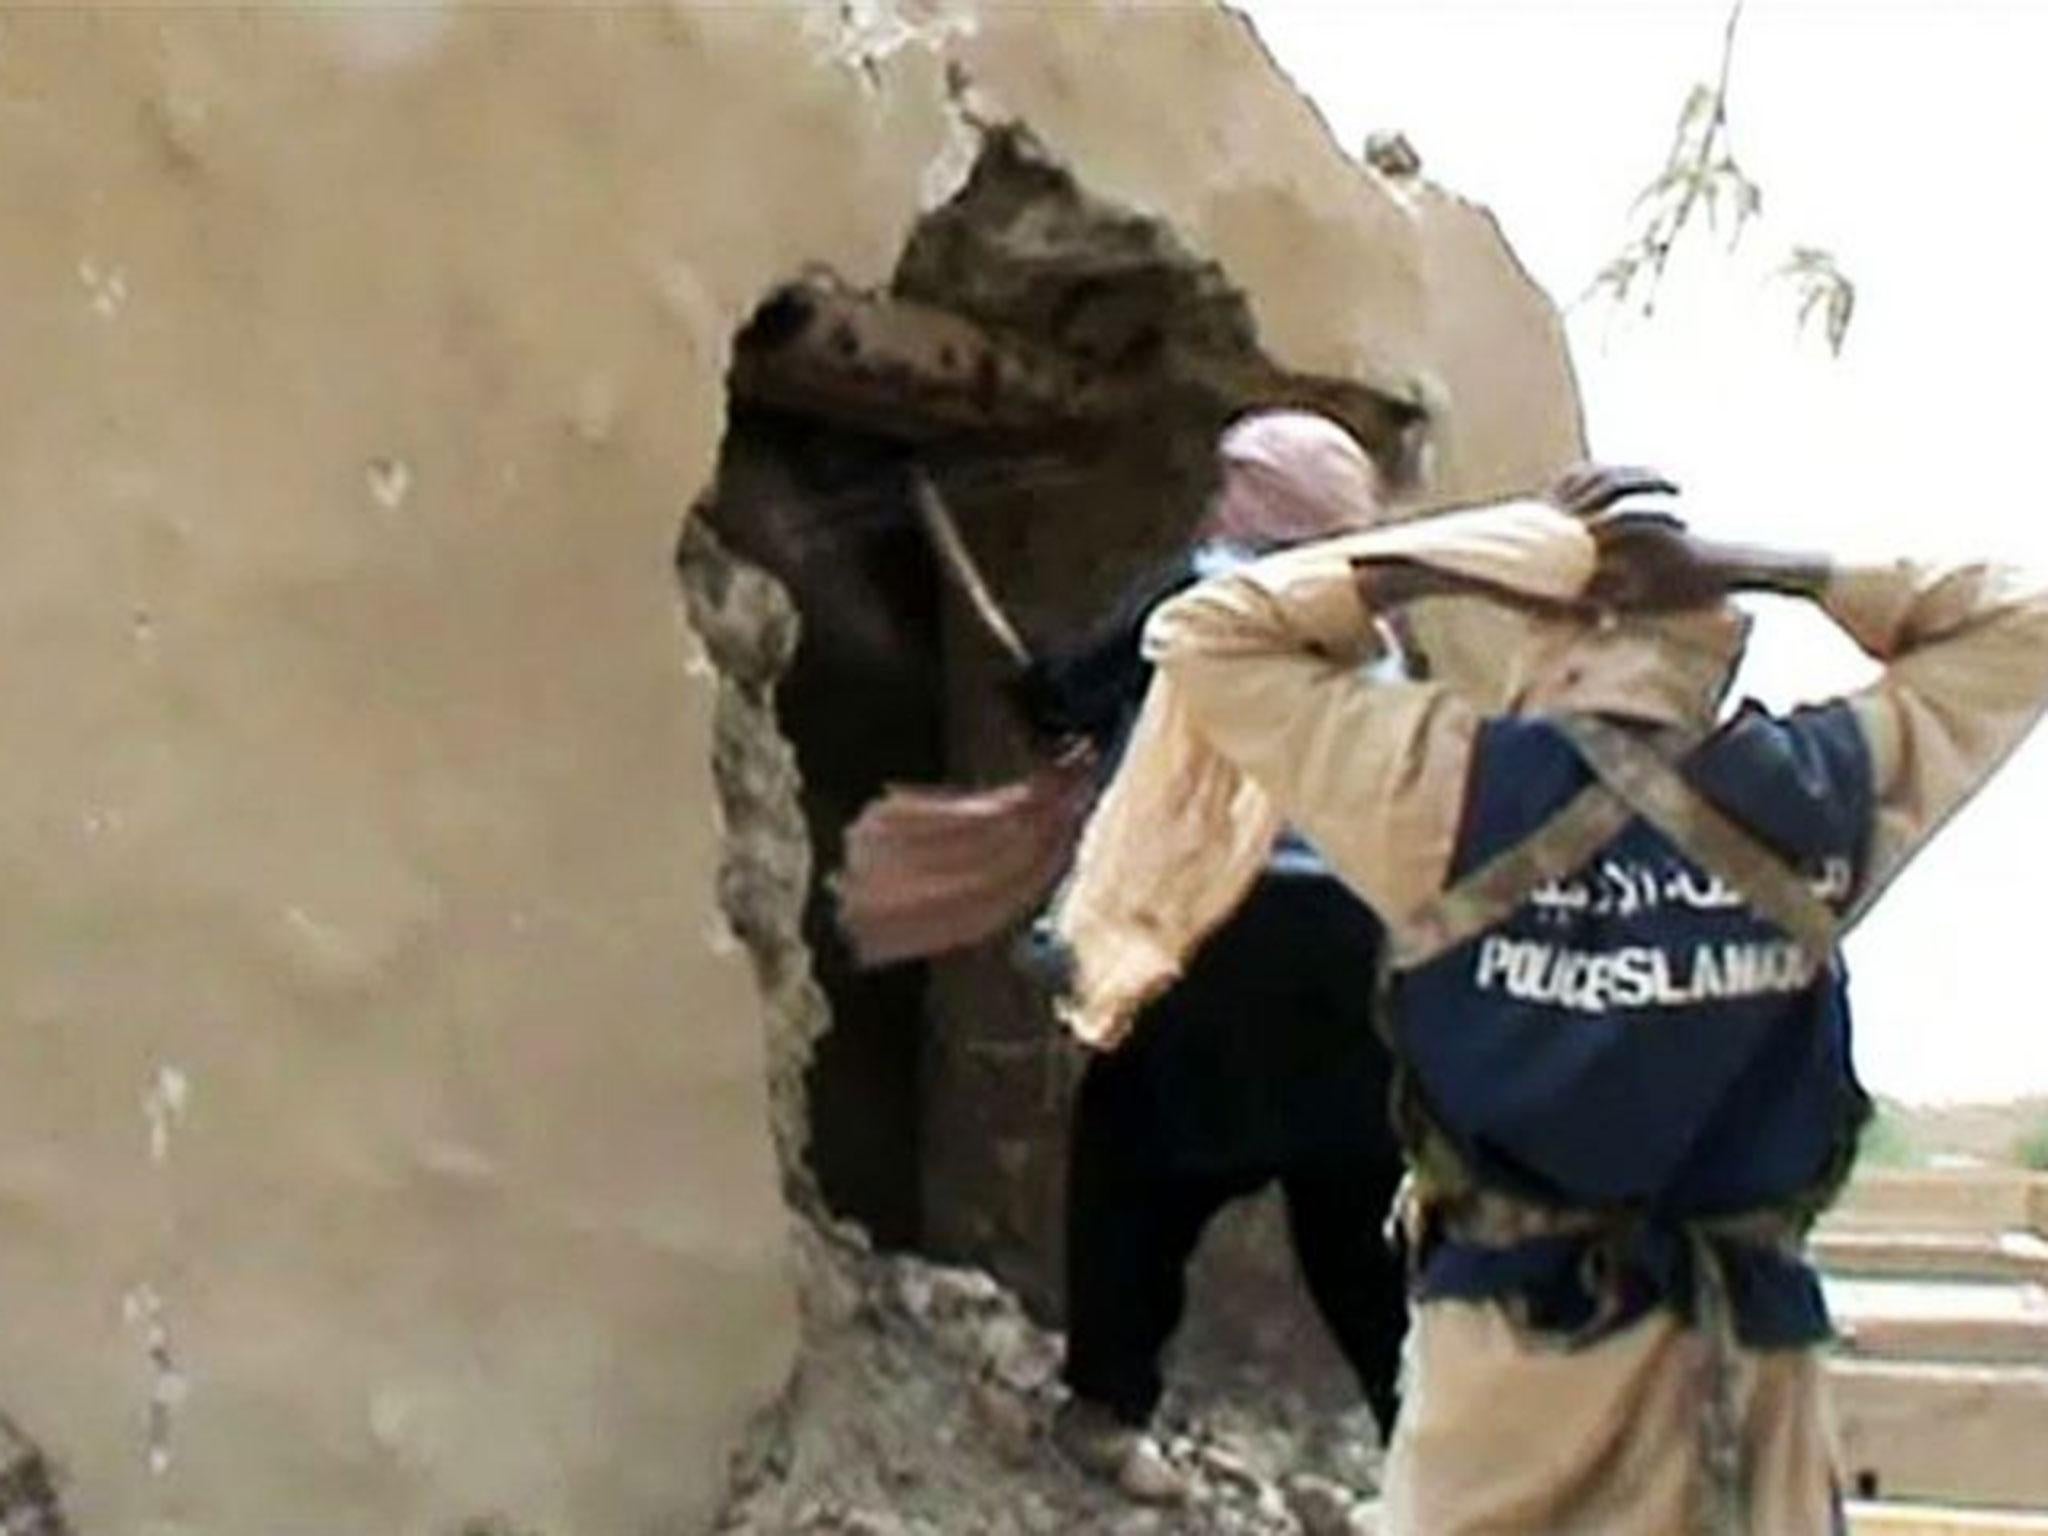 This file image grab photo taken on 1 July, 2012 shows Islamist militants destroying an ancient shrine in Timbuktu